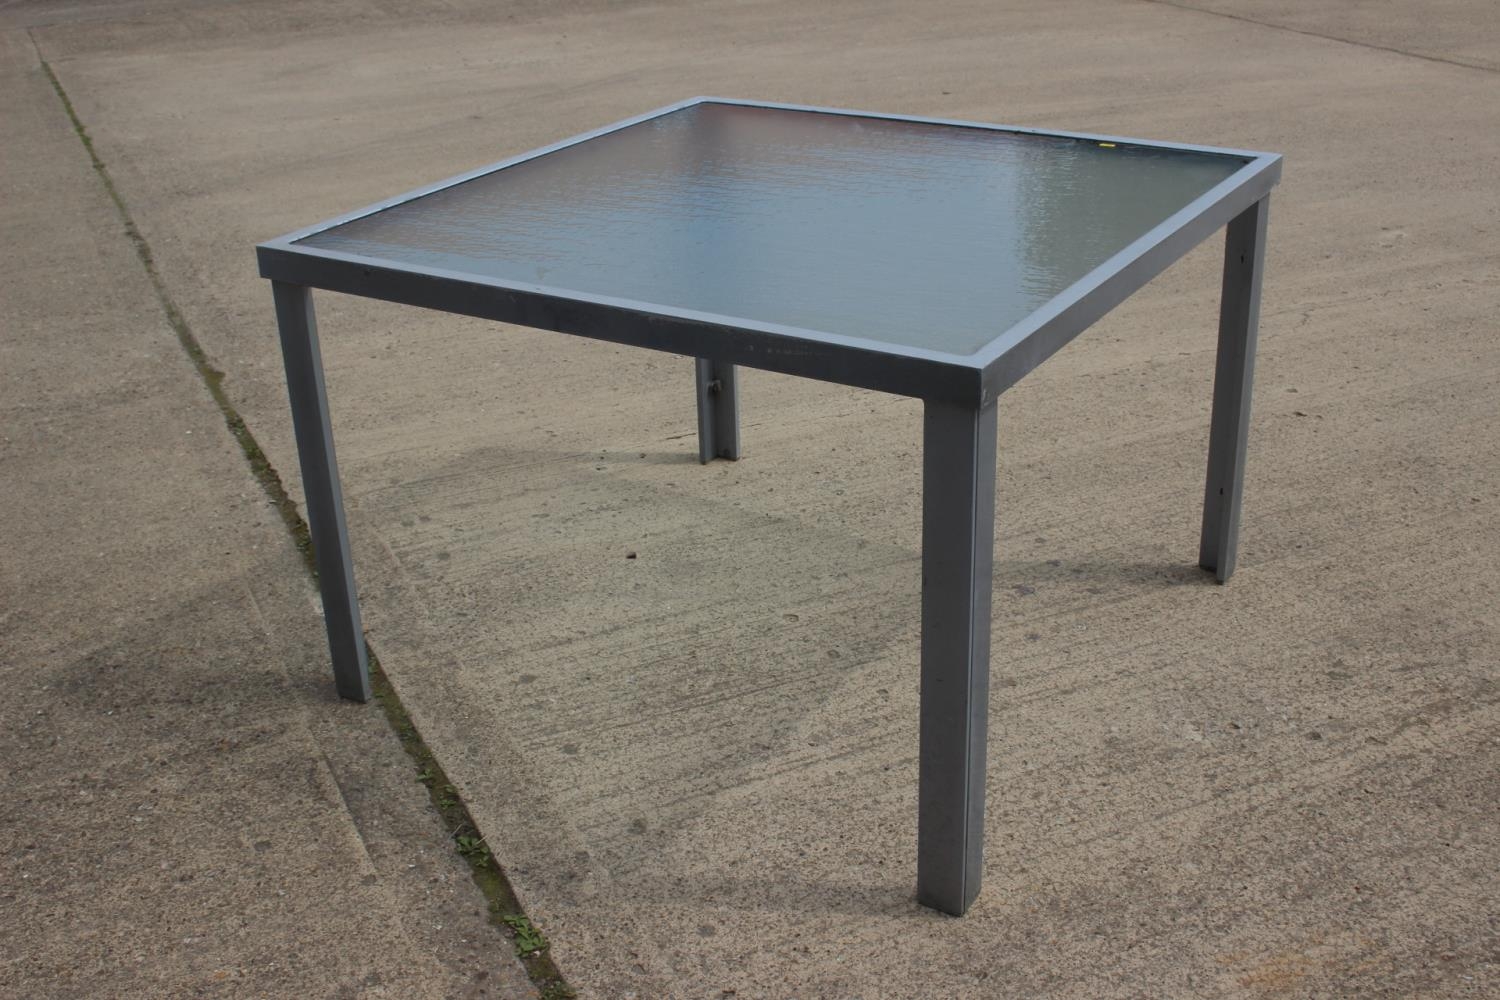 A glass top garden table, 43" square x 28" high